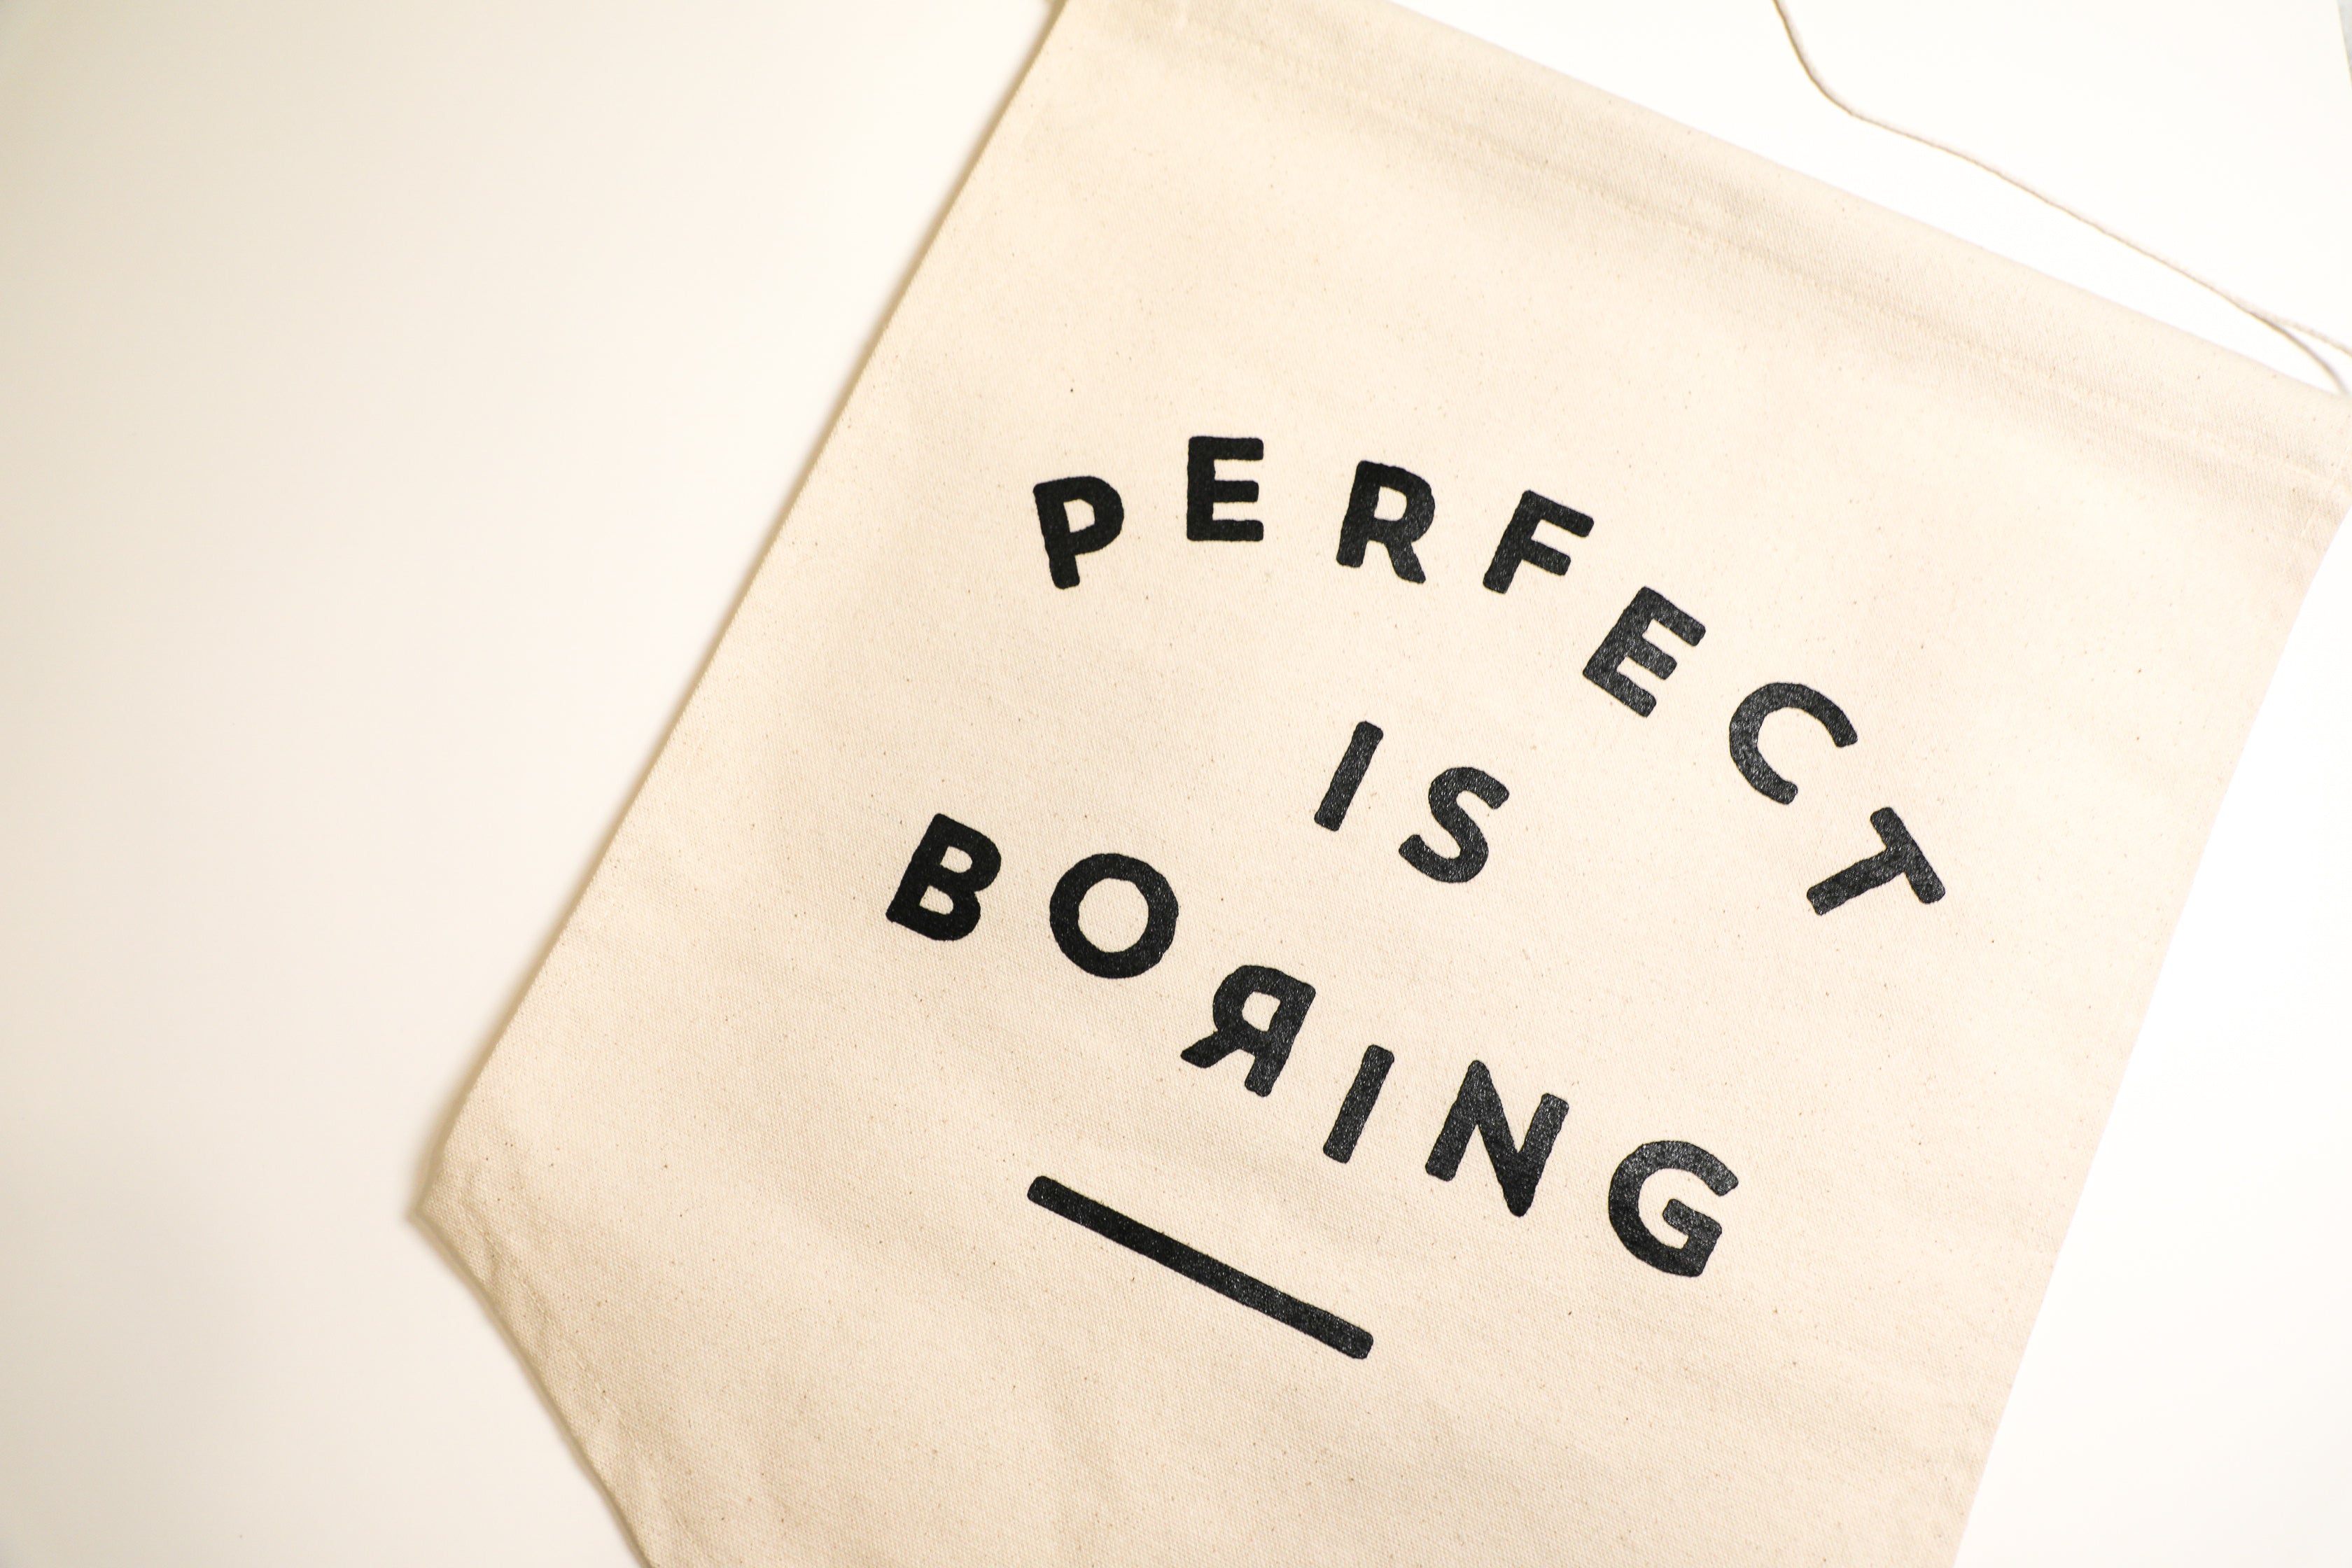 Perfect is Boring Canvas Banner